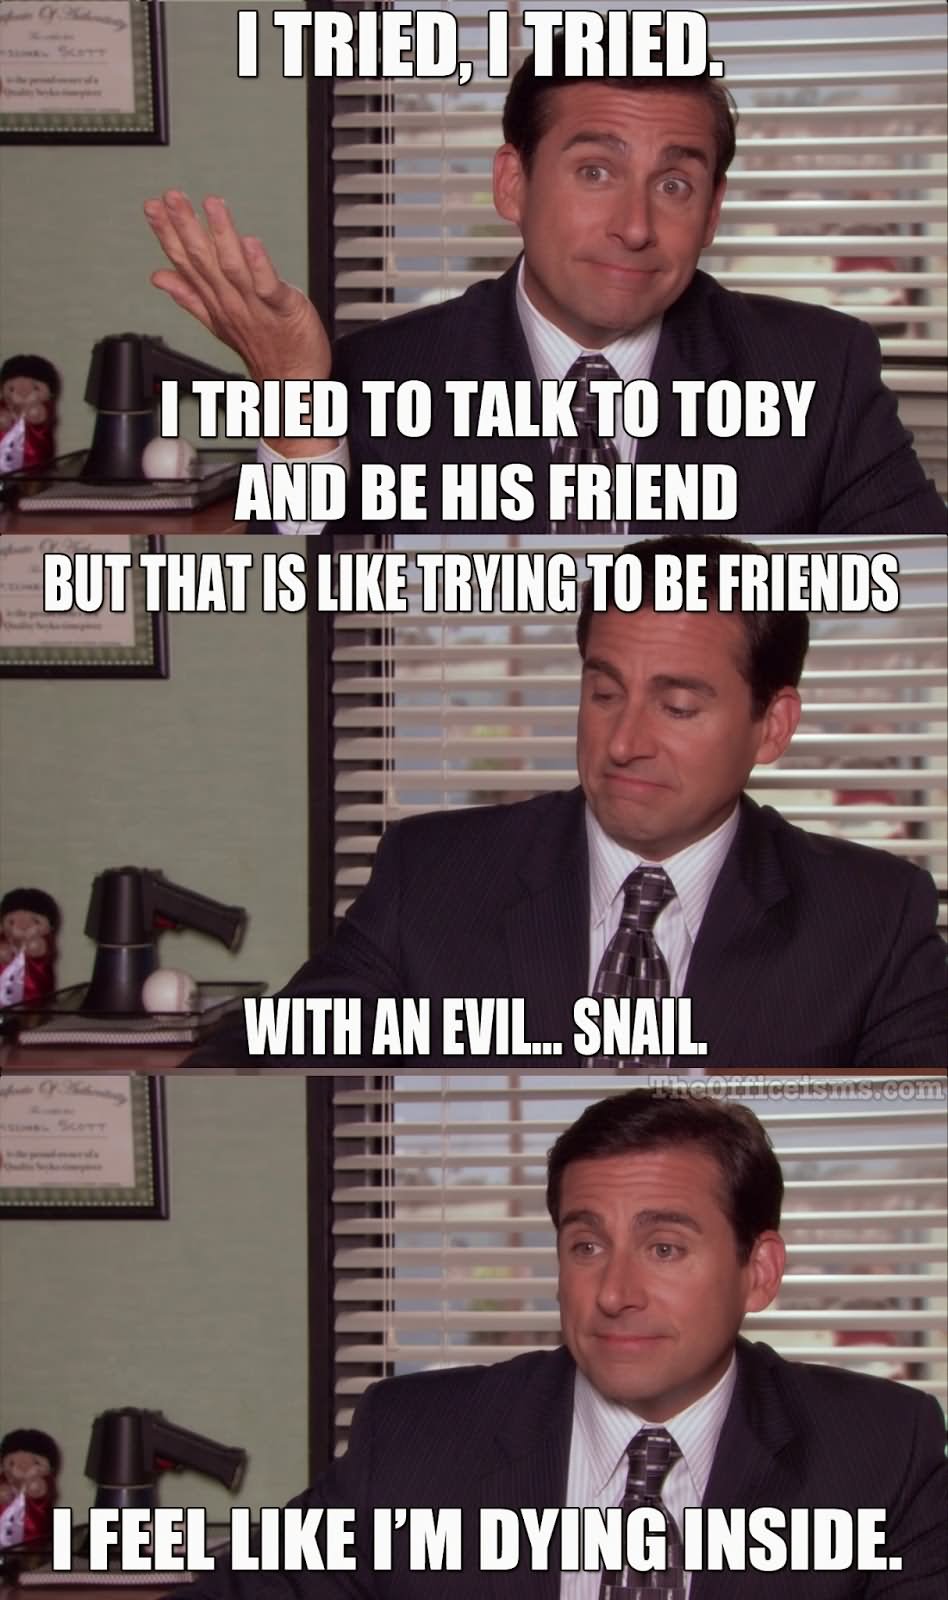 I Tried To Talk To Toby And Be His Friend Funny Office Meme Image